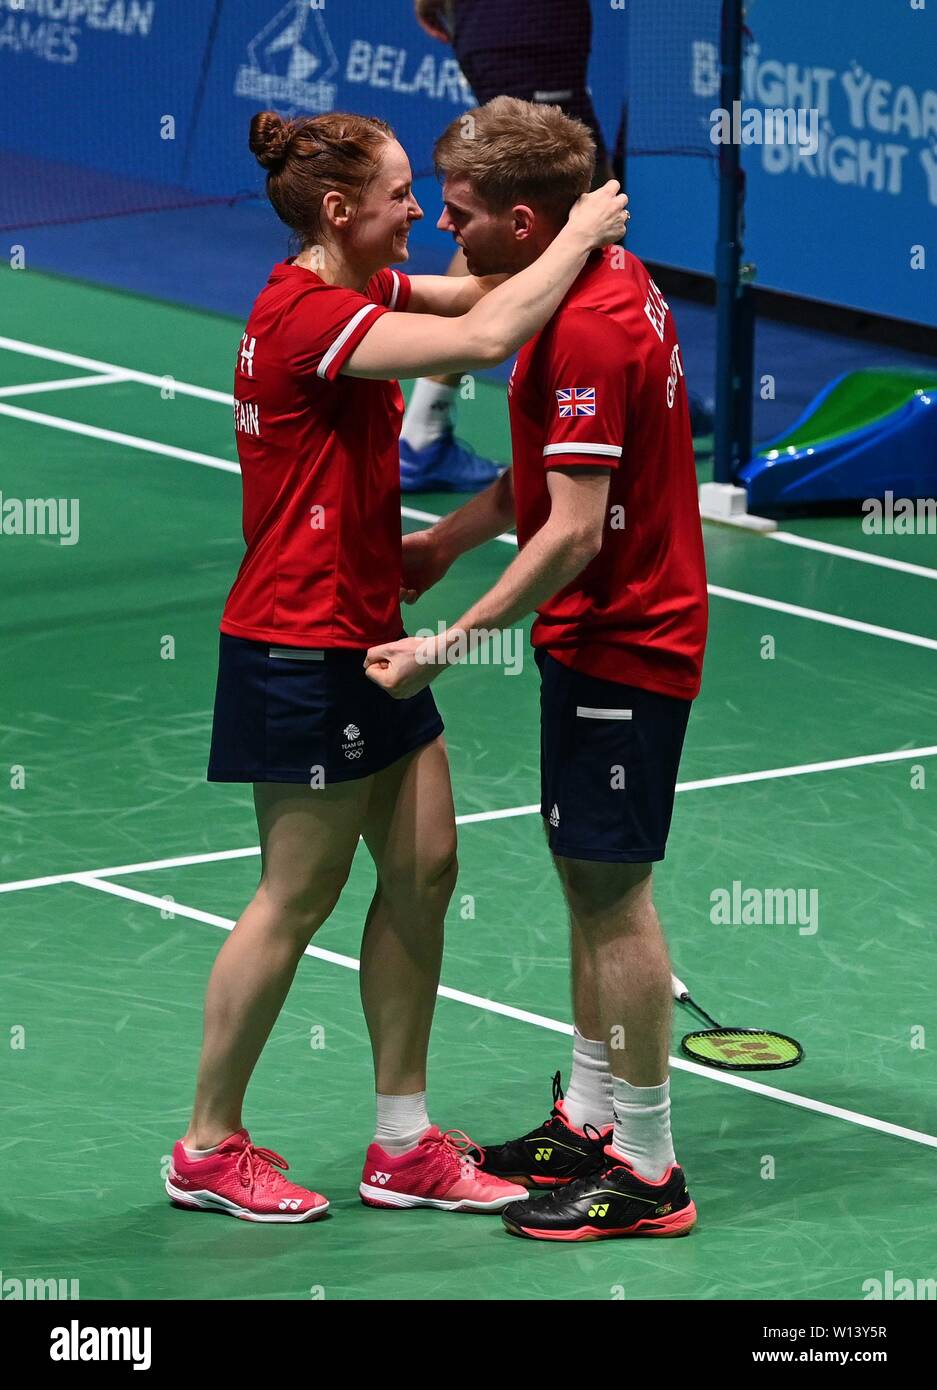 Minsk. Belarus. 30 June 2019. Lauren Smith and Marcus Ellis (GBR) celebrate  winning the badminton mixed doubles final at the 2nd European games. Credit  Garry Bowden/SIP photo agency/Alamy live news Stock Photo -